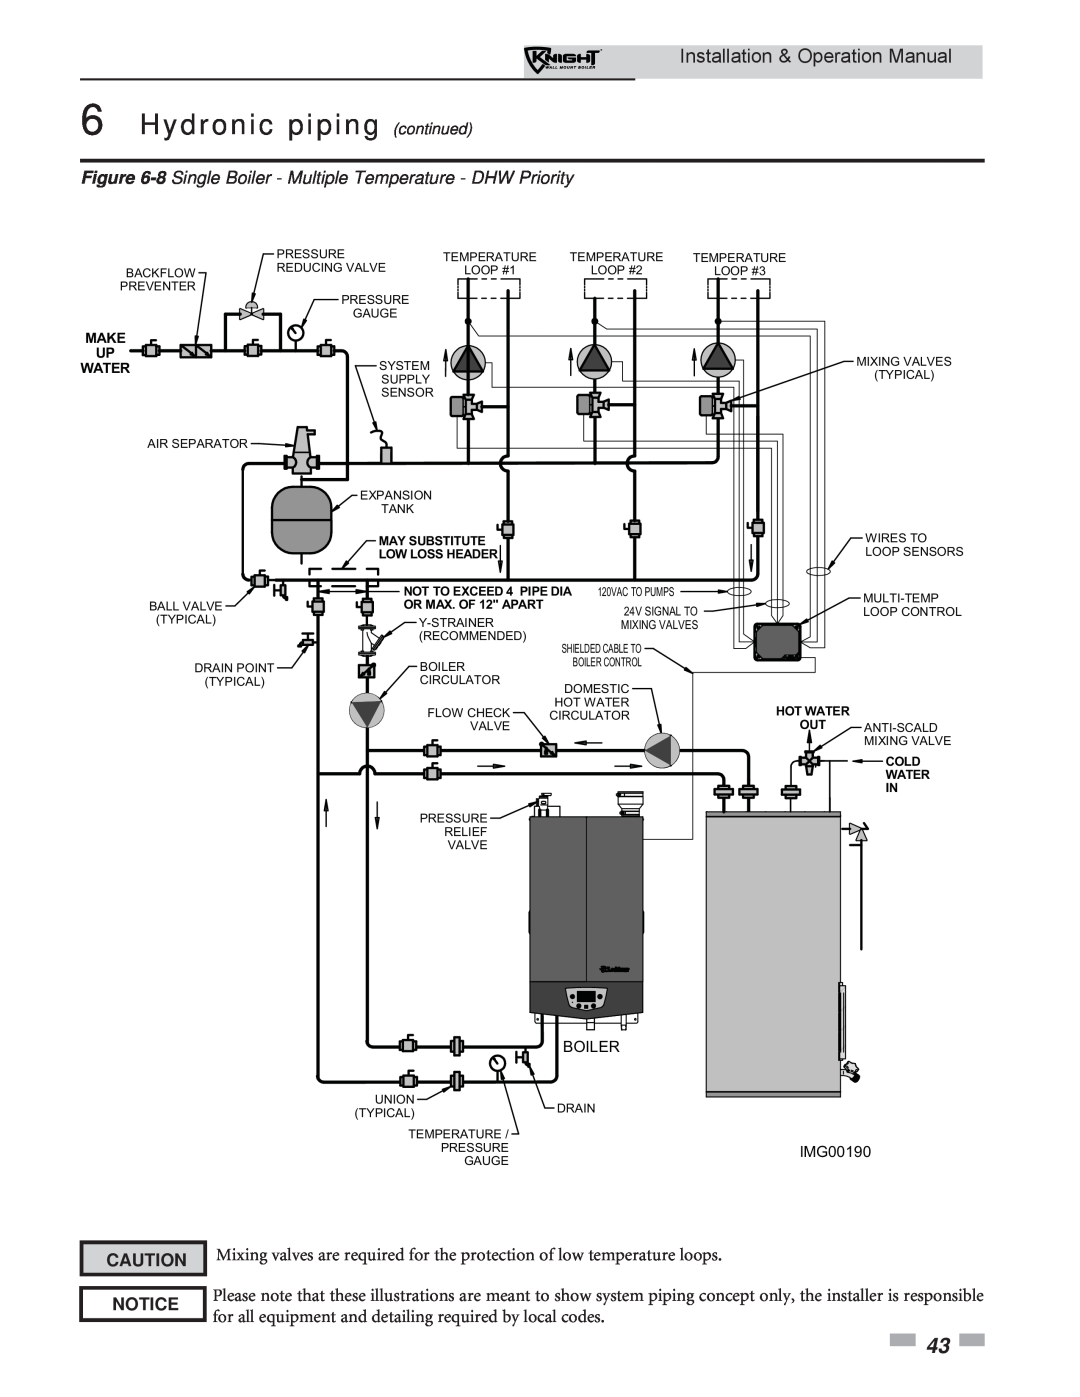 Lochinvar WH 55-399 Hydronic piping continued, Installation & Operation Manual, Notice, Boiler, IMG00190, Make 